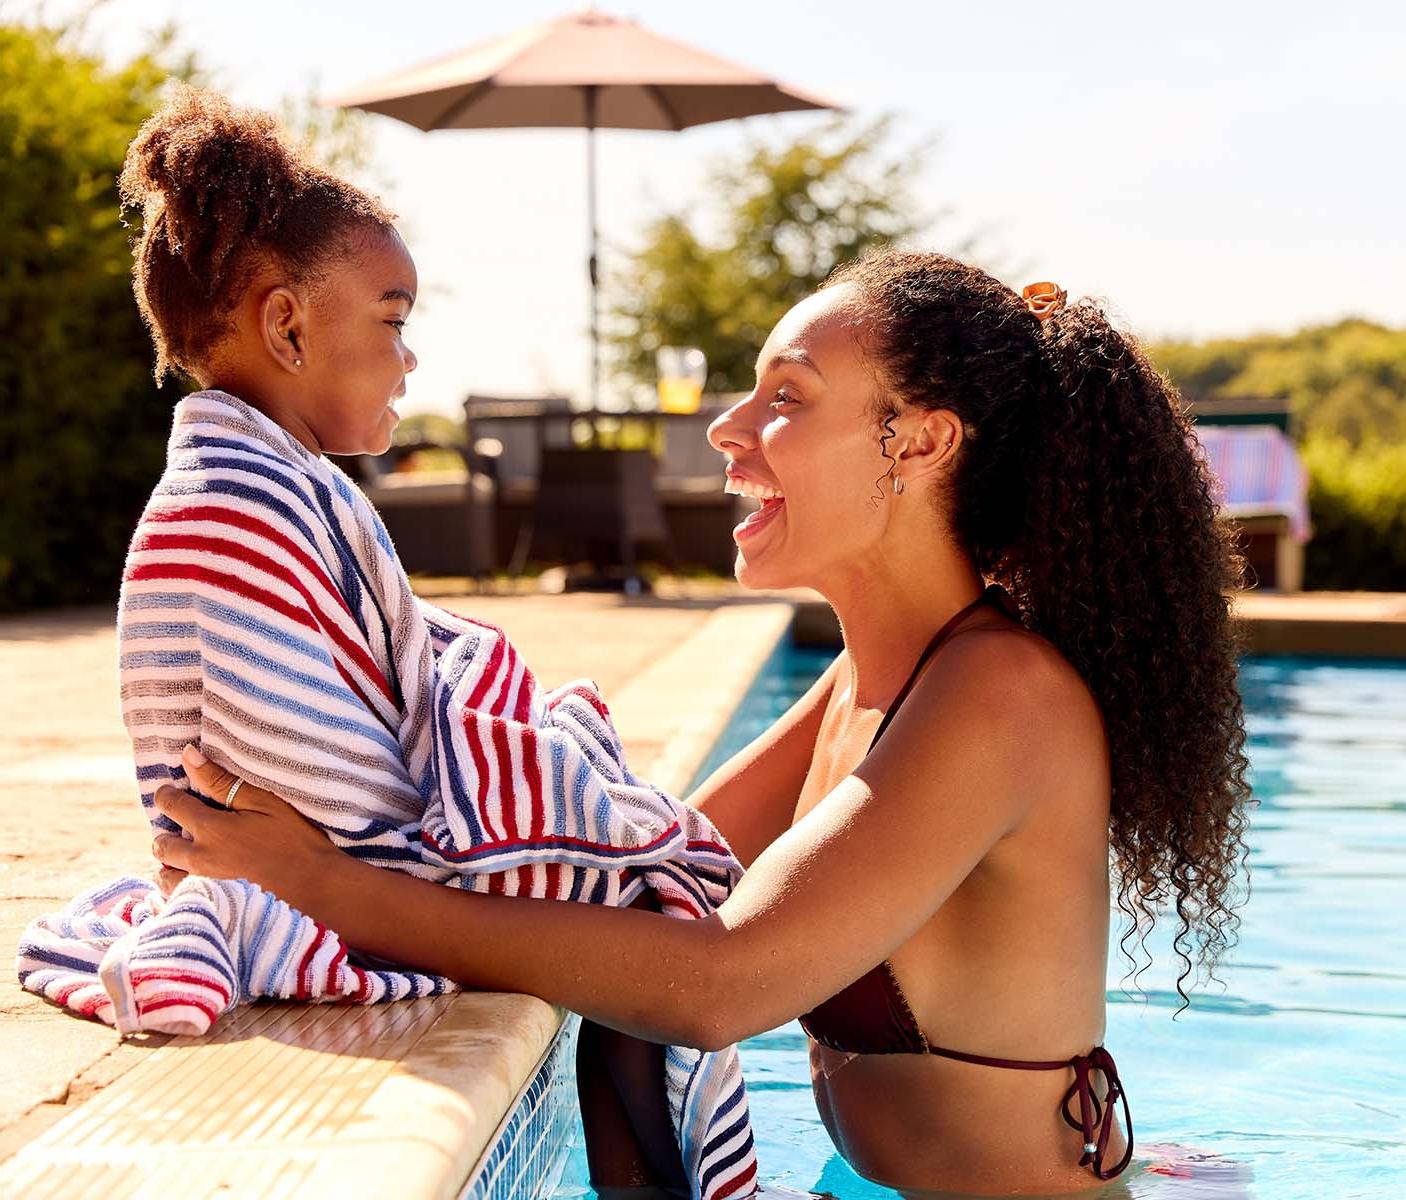 A laughing woman wraps a child in a towel poolside